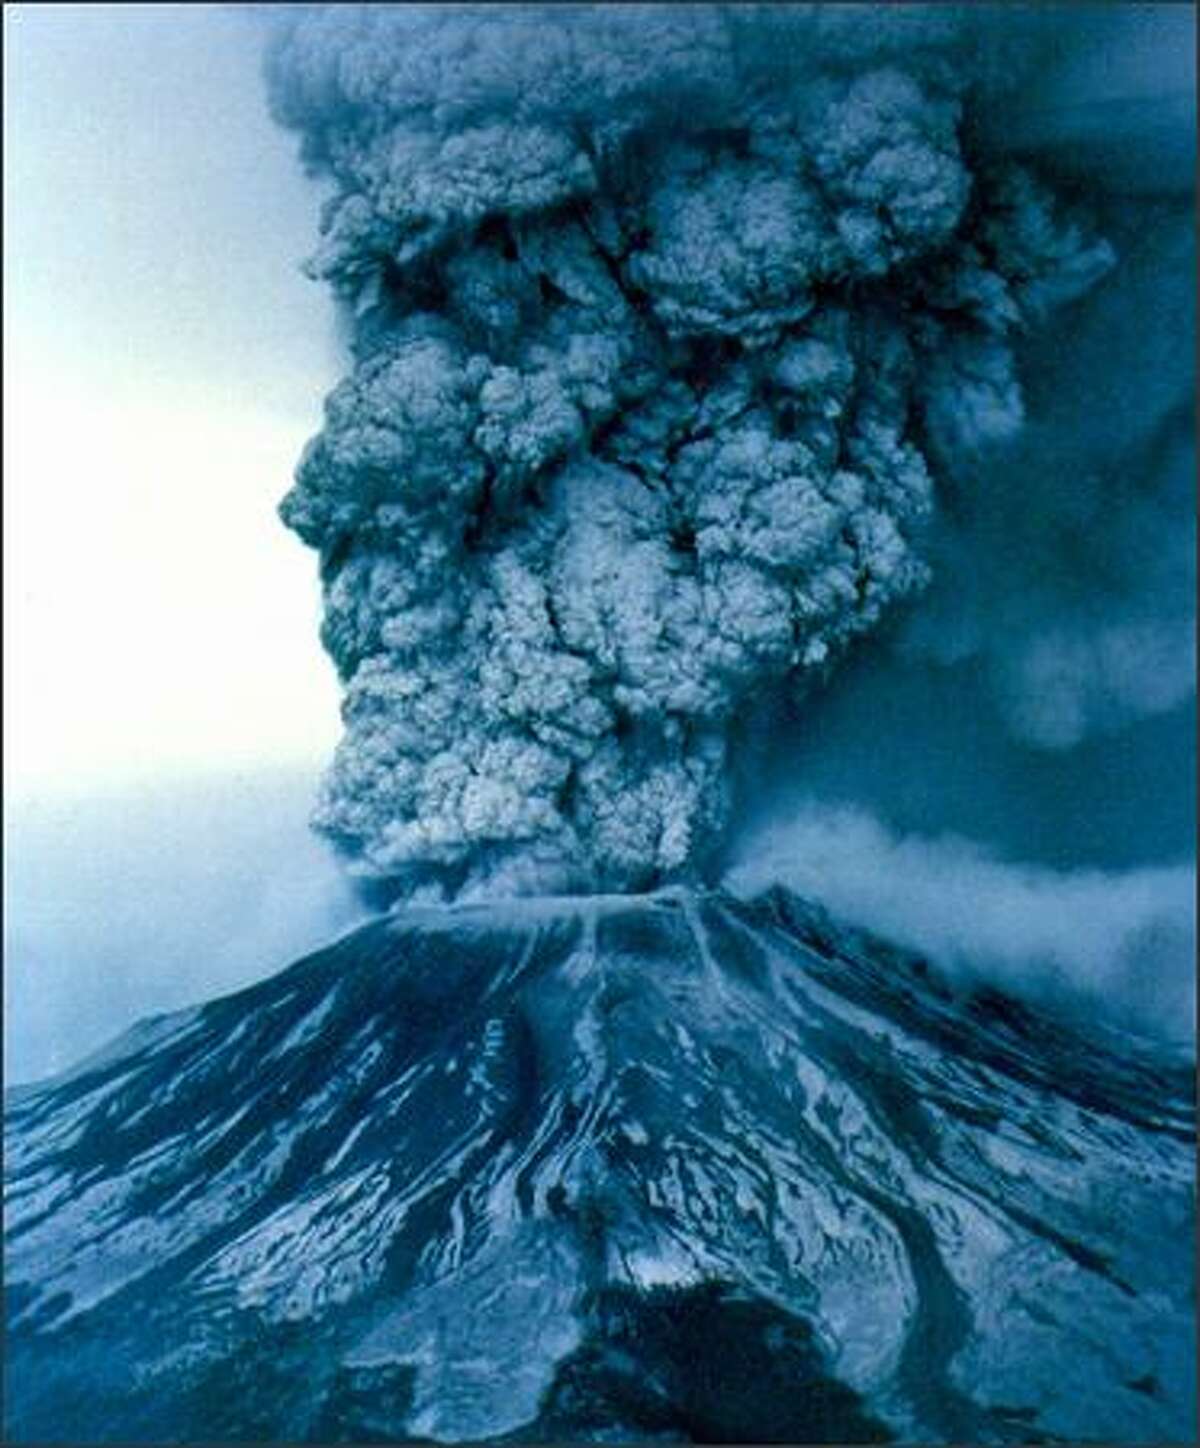 May 18, 1980 -- Mount St. Helens erupted causing widespread damage and sent ash thousands of feet into the air.